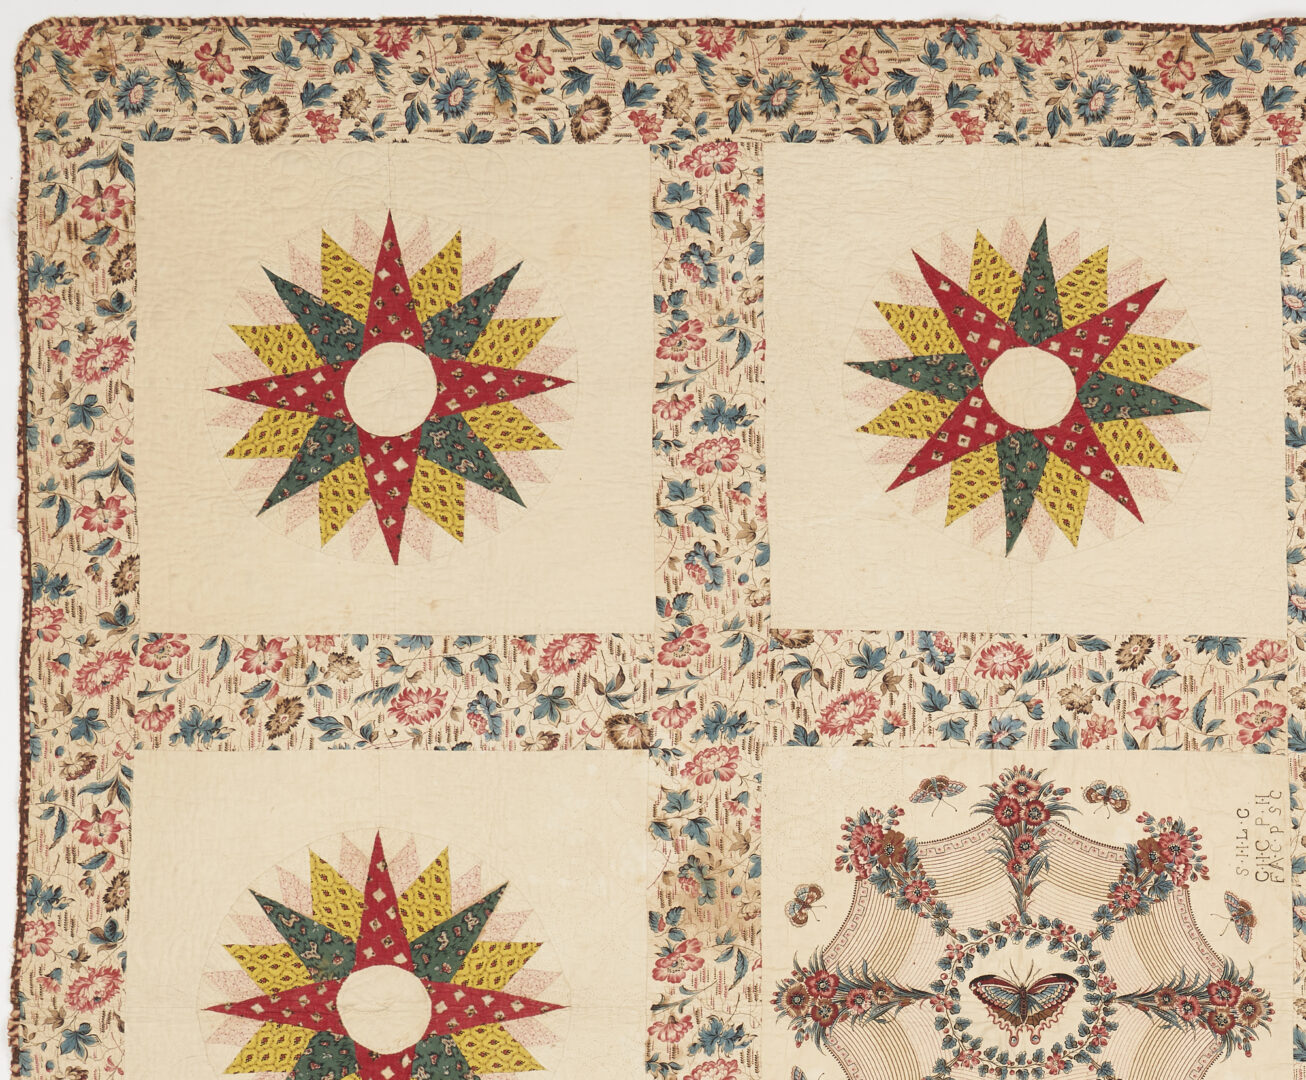 Lot 197: Southern Applique Quilt w/ Rare Chintz Butterfly Panel, dated 1845